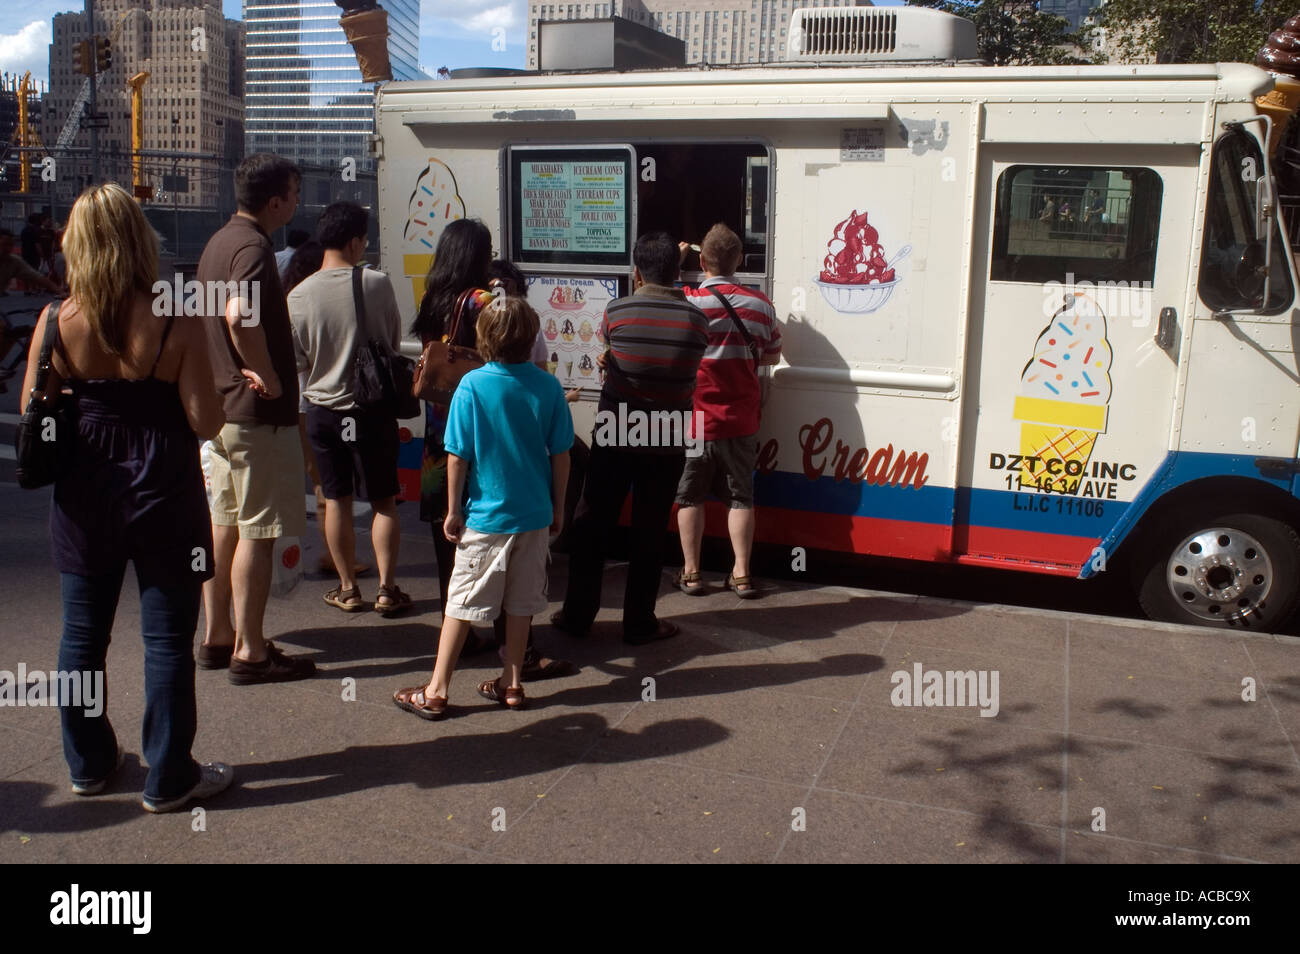 A Soft Ice Cream Truck Parked On Liberty Street In Lower Manhattan Stock Photo Alamy